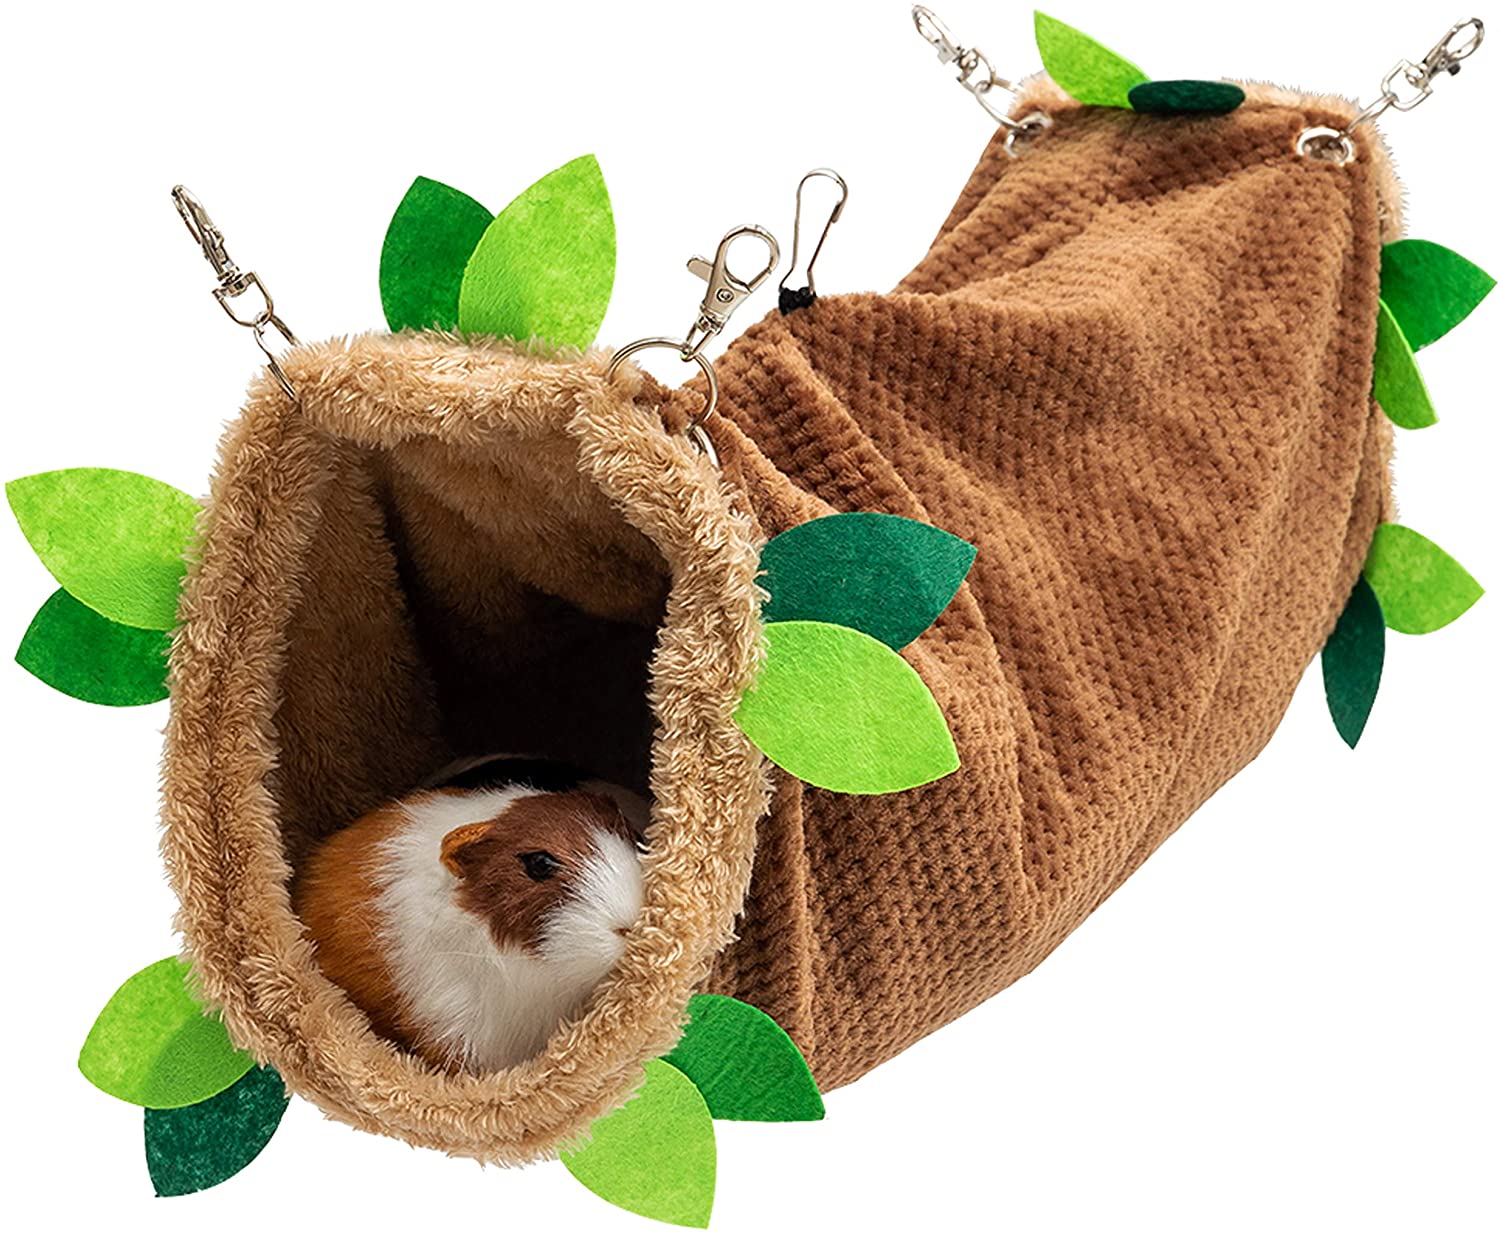 Green Hamster Fun Tunnel Pet Mouse Plastic Tube Toys Small Animal Foldable Exercising Training Hideout Tunnels with Cute pet Toys for Guinea Pigs,Gerbils,Rats,Mice,Ferrets and Other Small Animals 